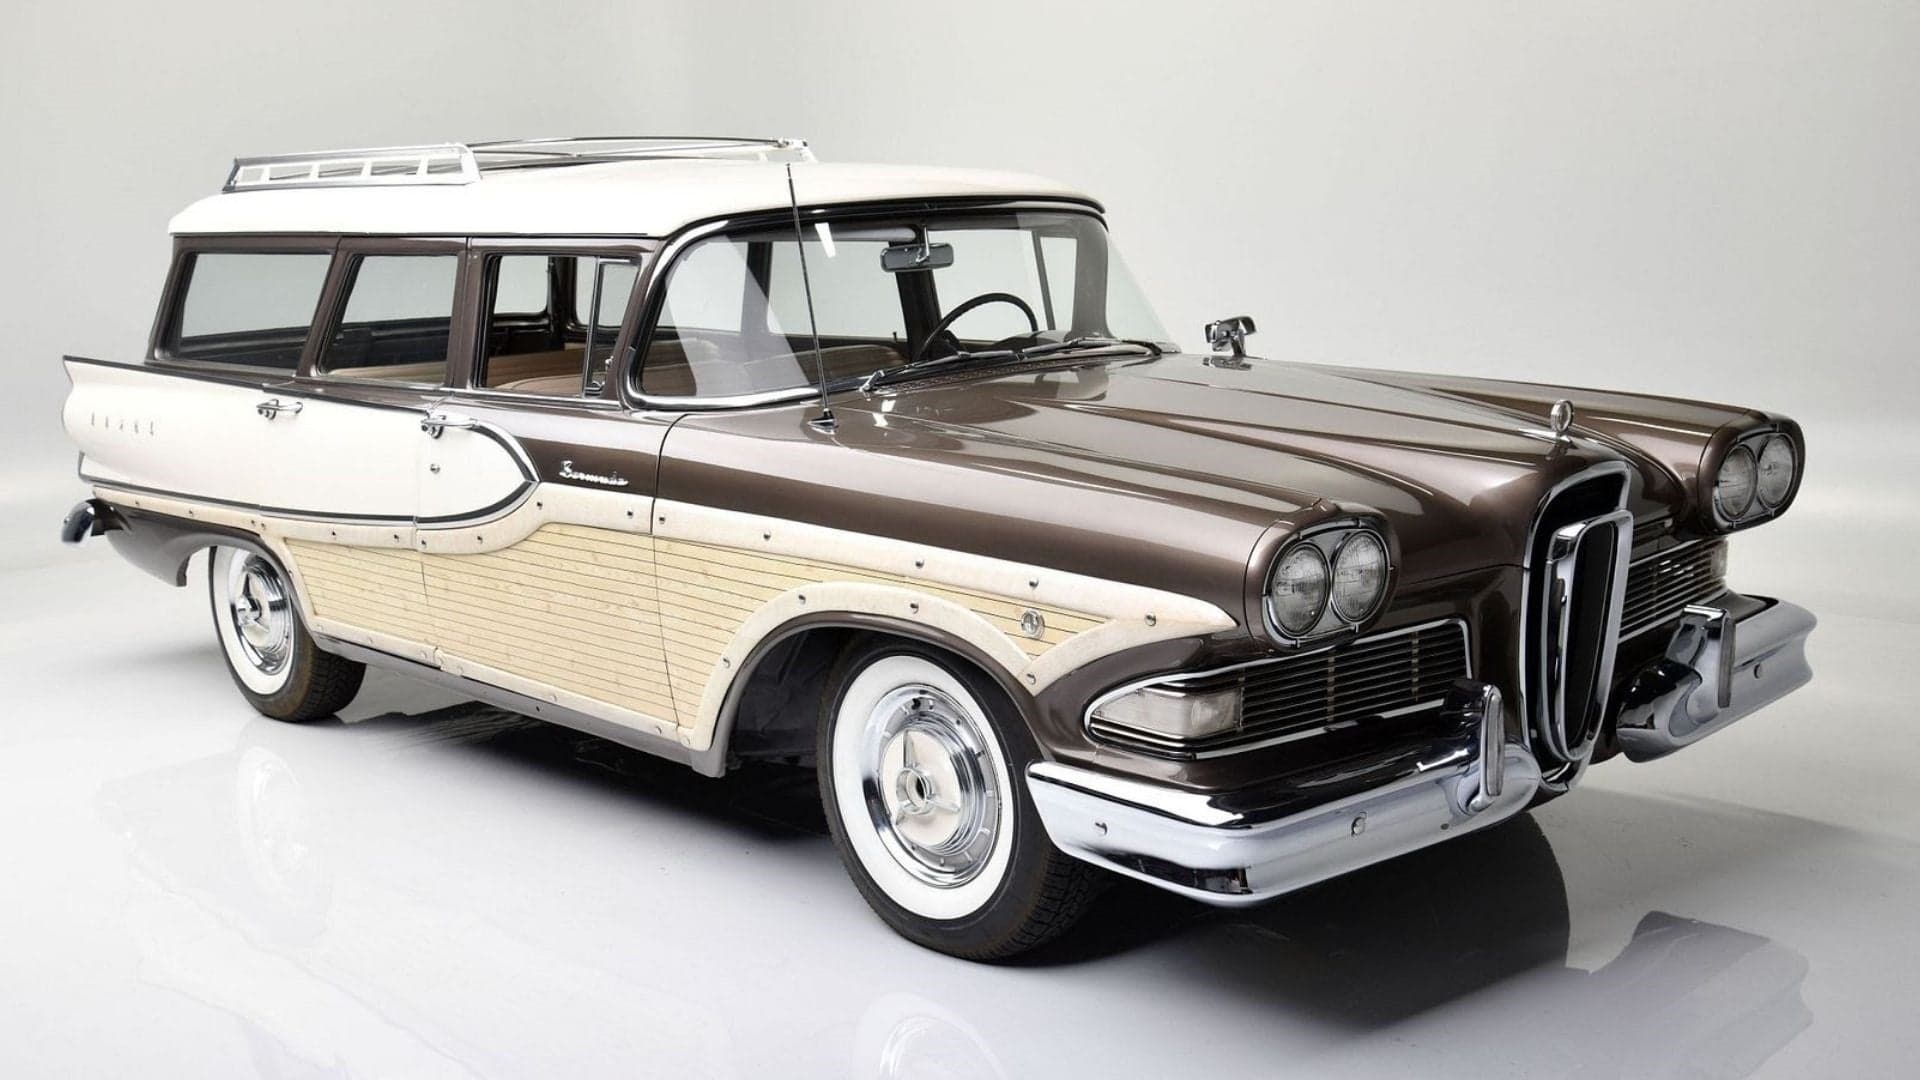 Henry Ford’s Great-Grandson Is Selling His Autographed Edsel and One-Off Woody